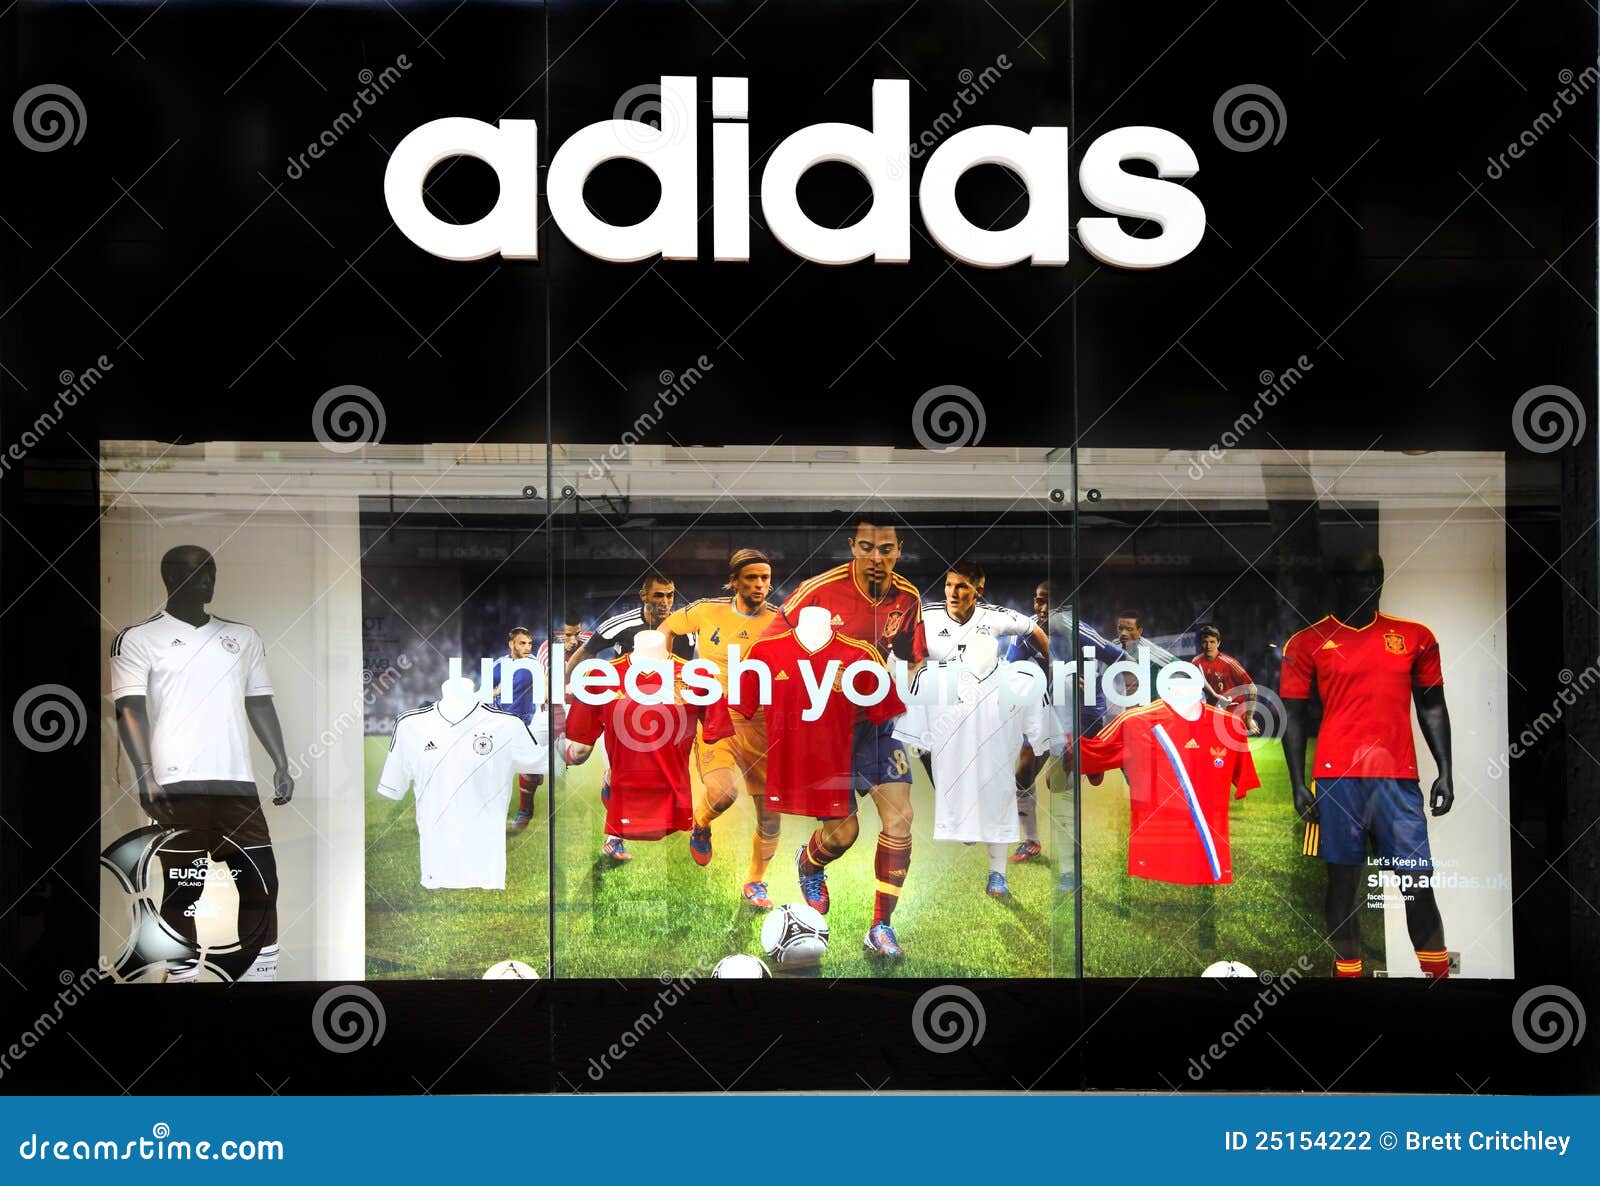 outlet adidas uk